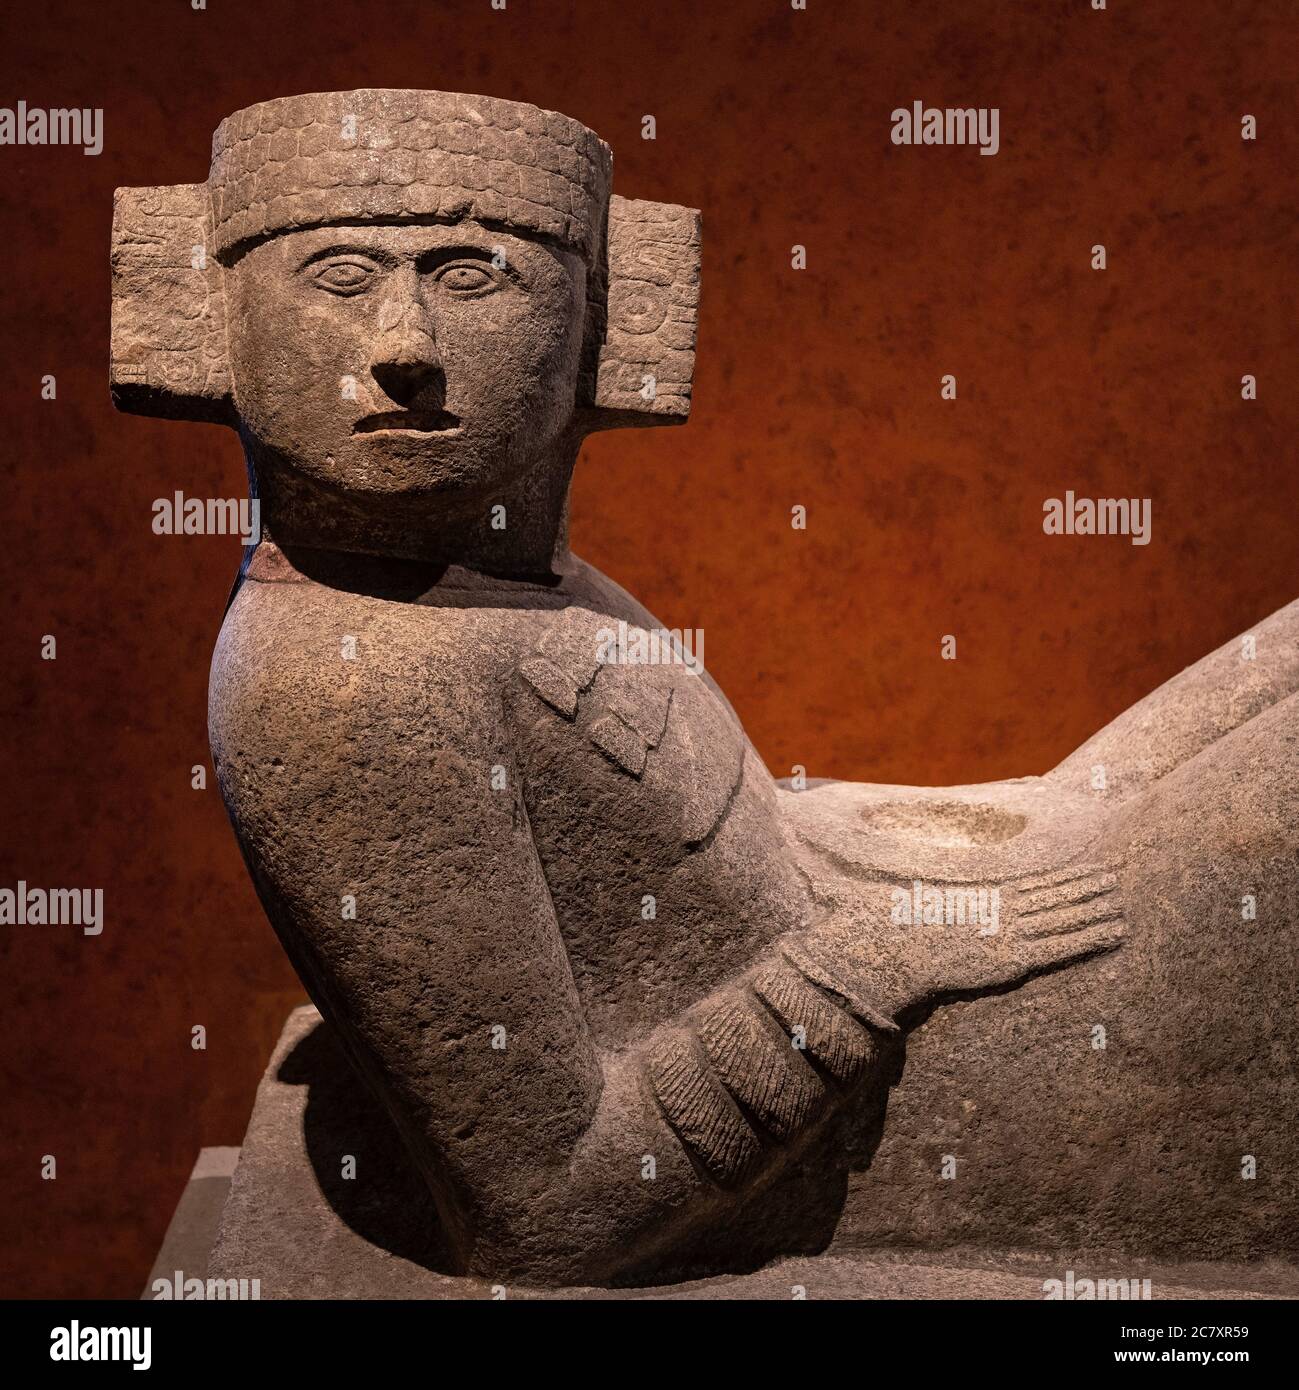 A Chac Mool sculpture of the Maya civilization with scale where hearts of human sacrifices were placed, Mexico City, Mexico. Stock Photo